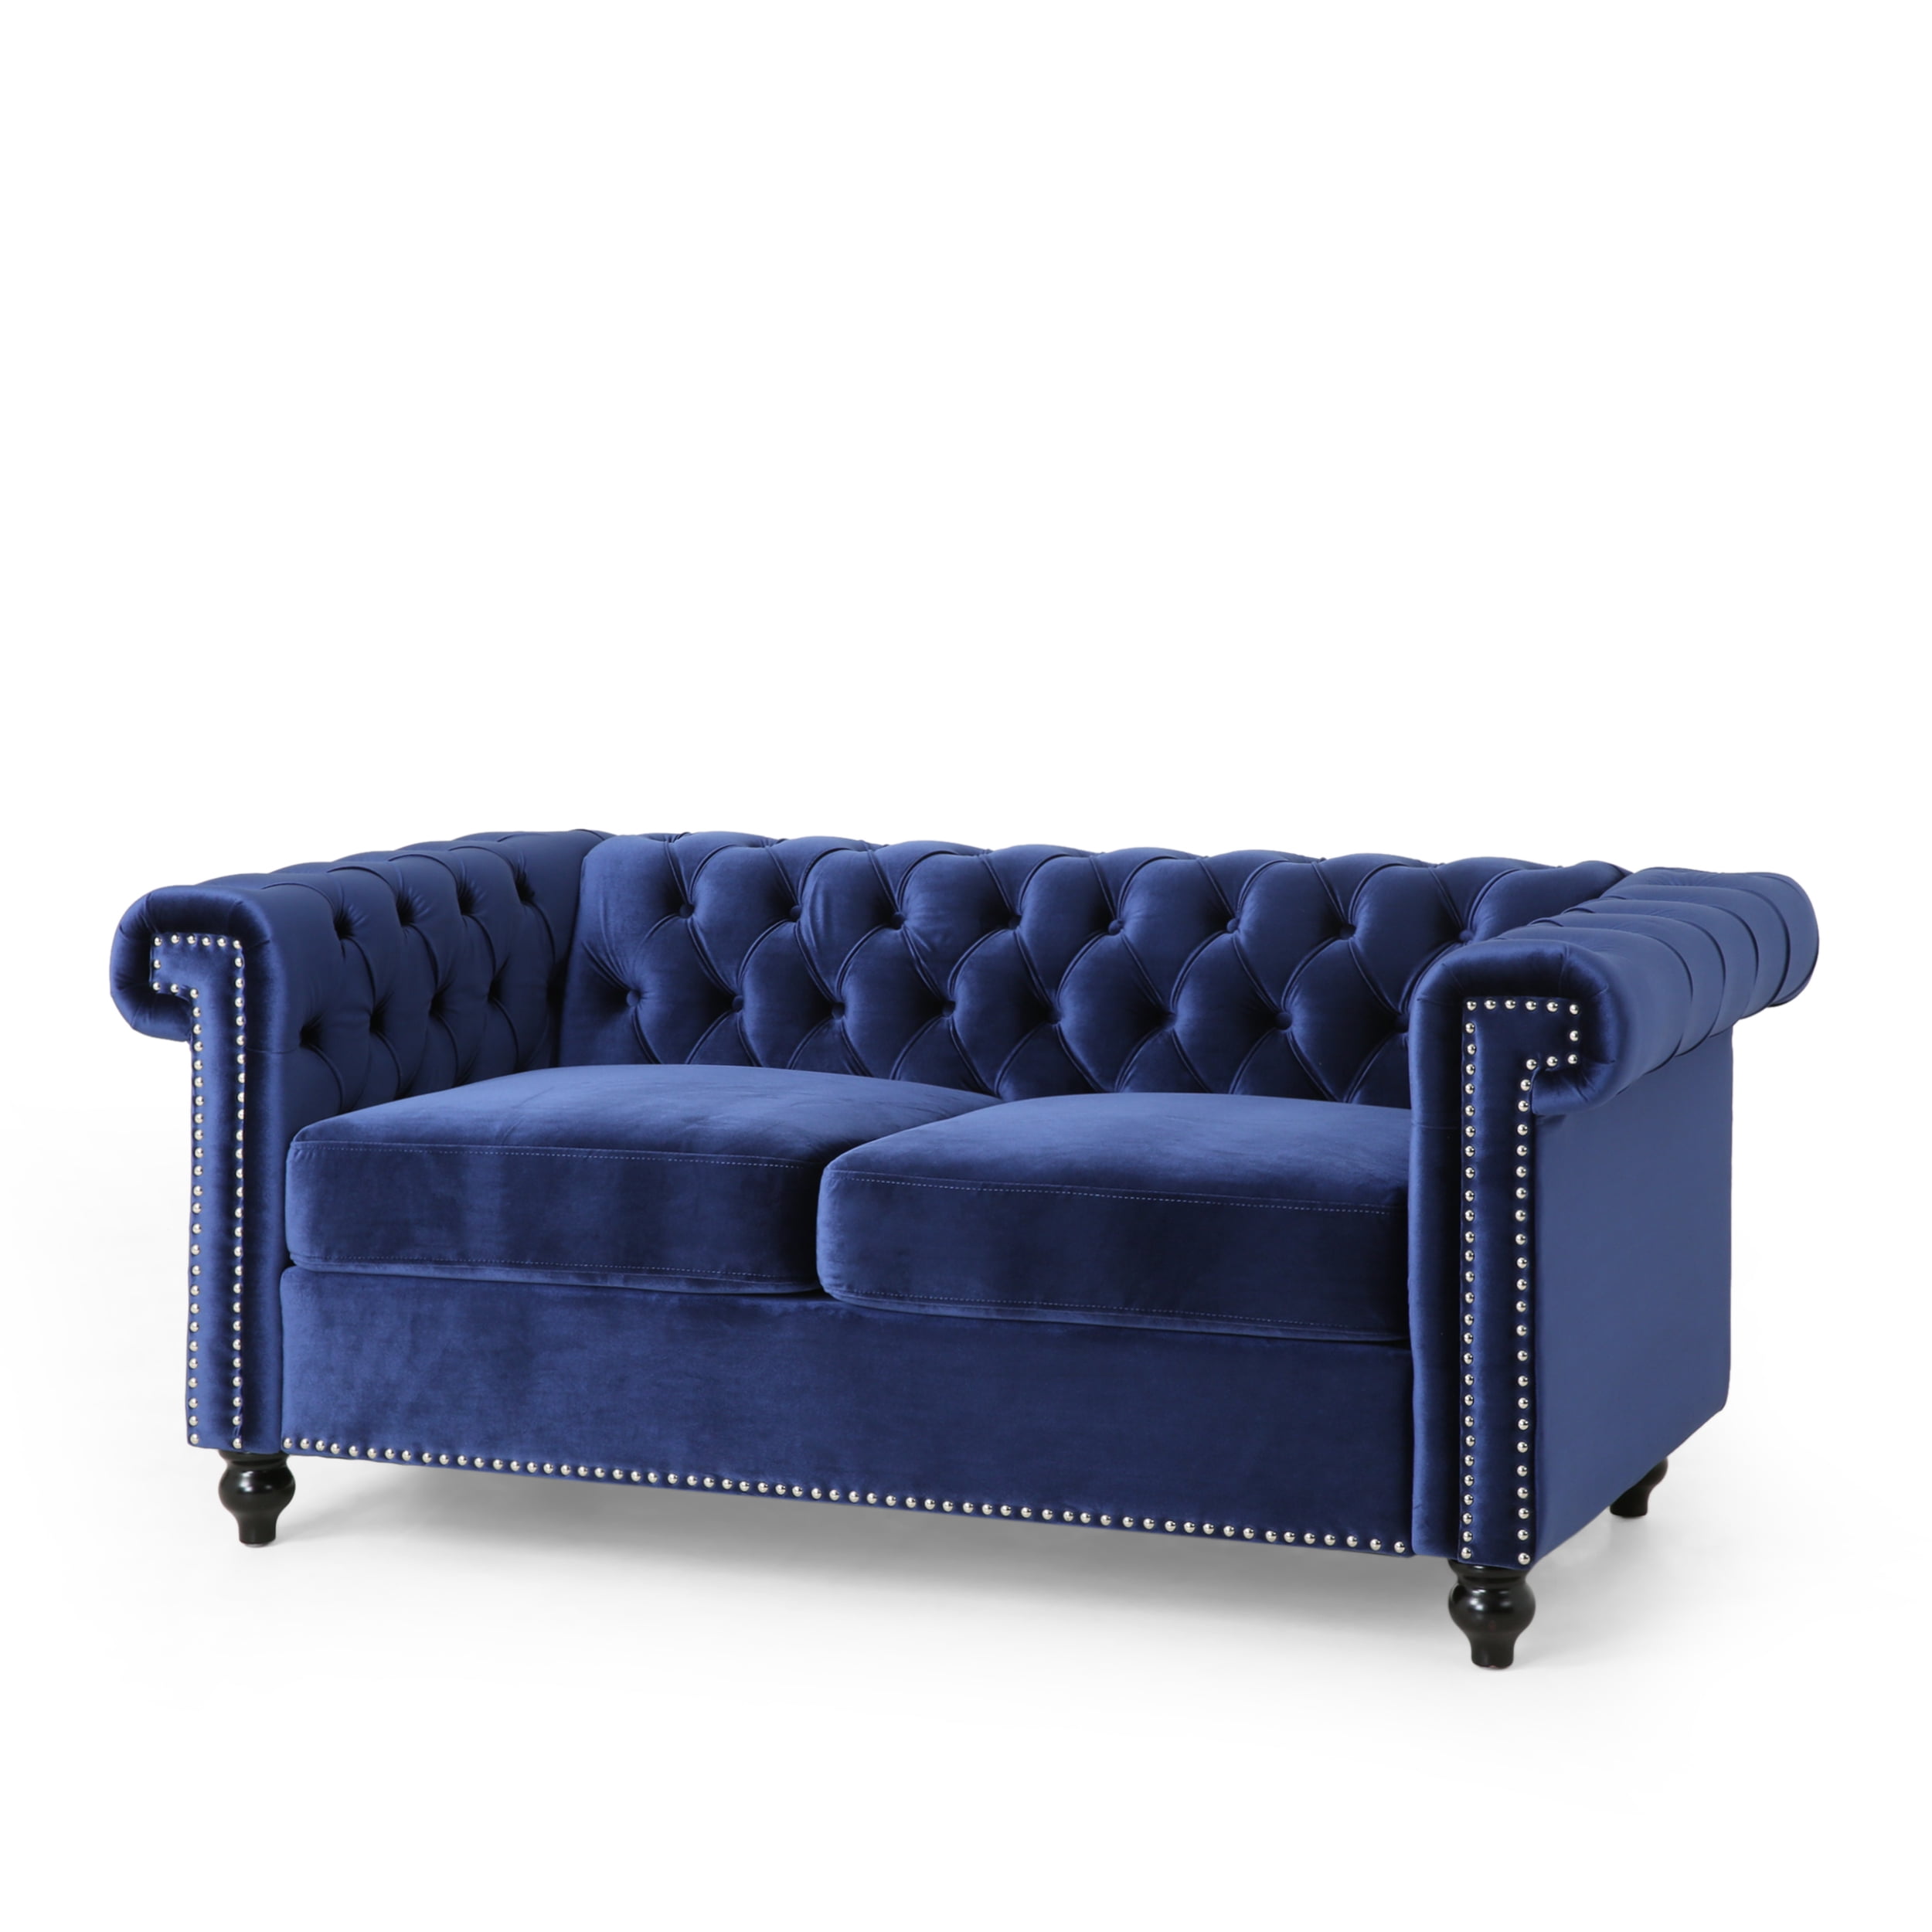 Details about   Melaina Chesterfield Button Tufted Scroll Arm Velvet Loveseat with Nailhead Trim 